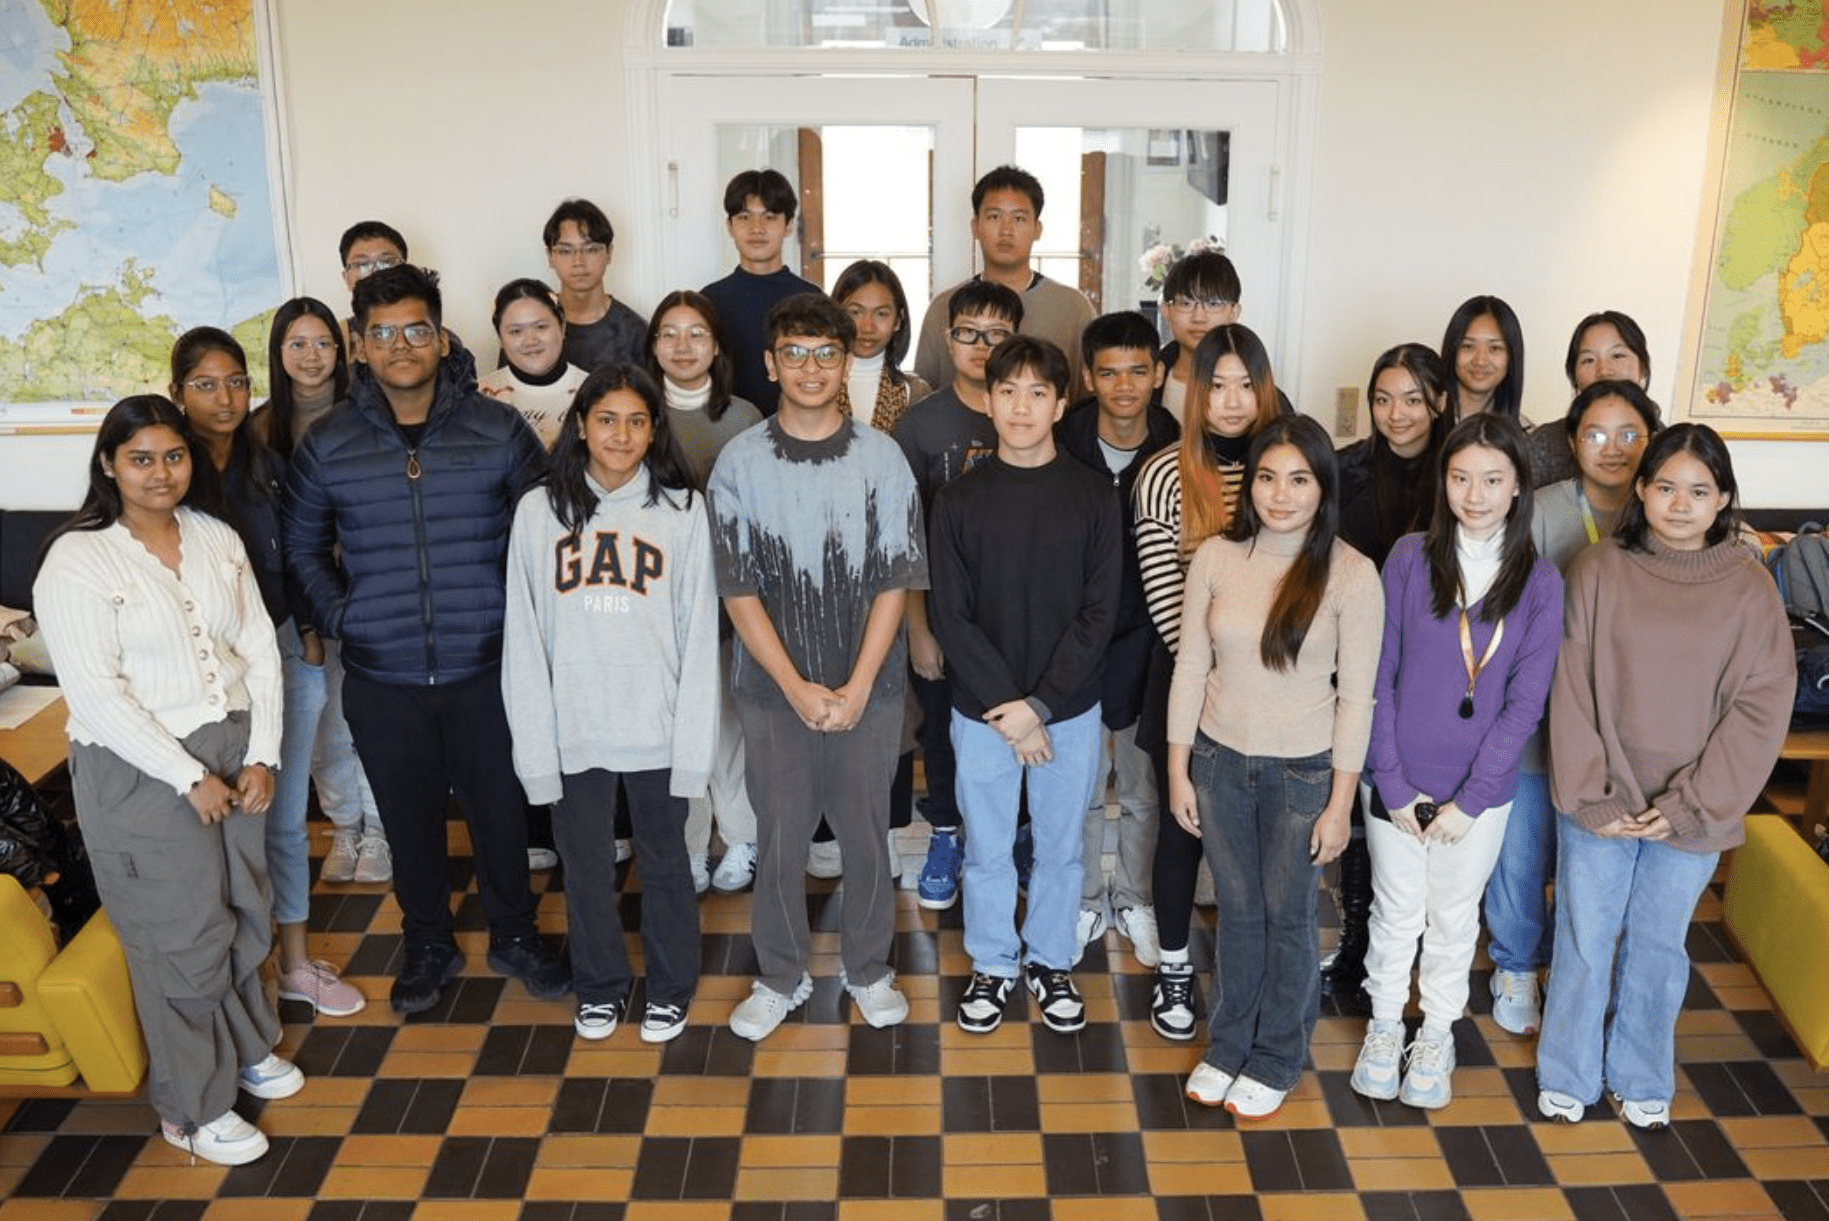 A group photo of 25 students from Thailand and India